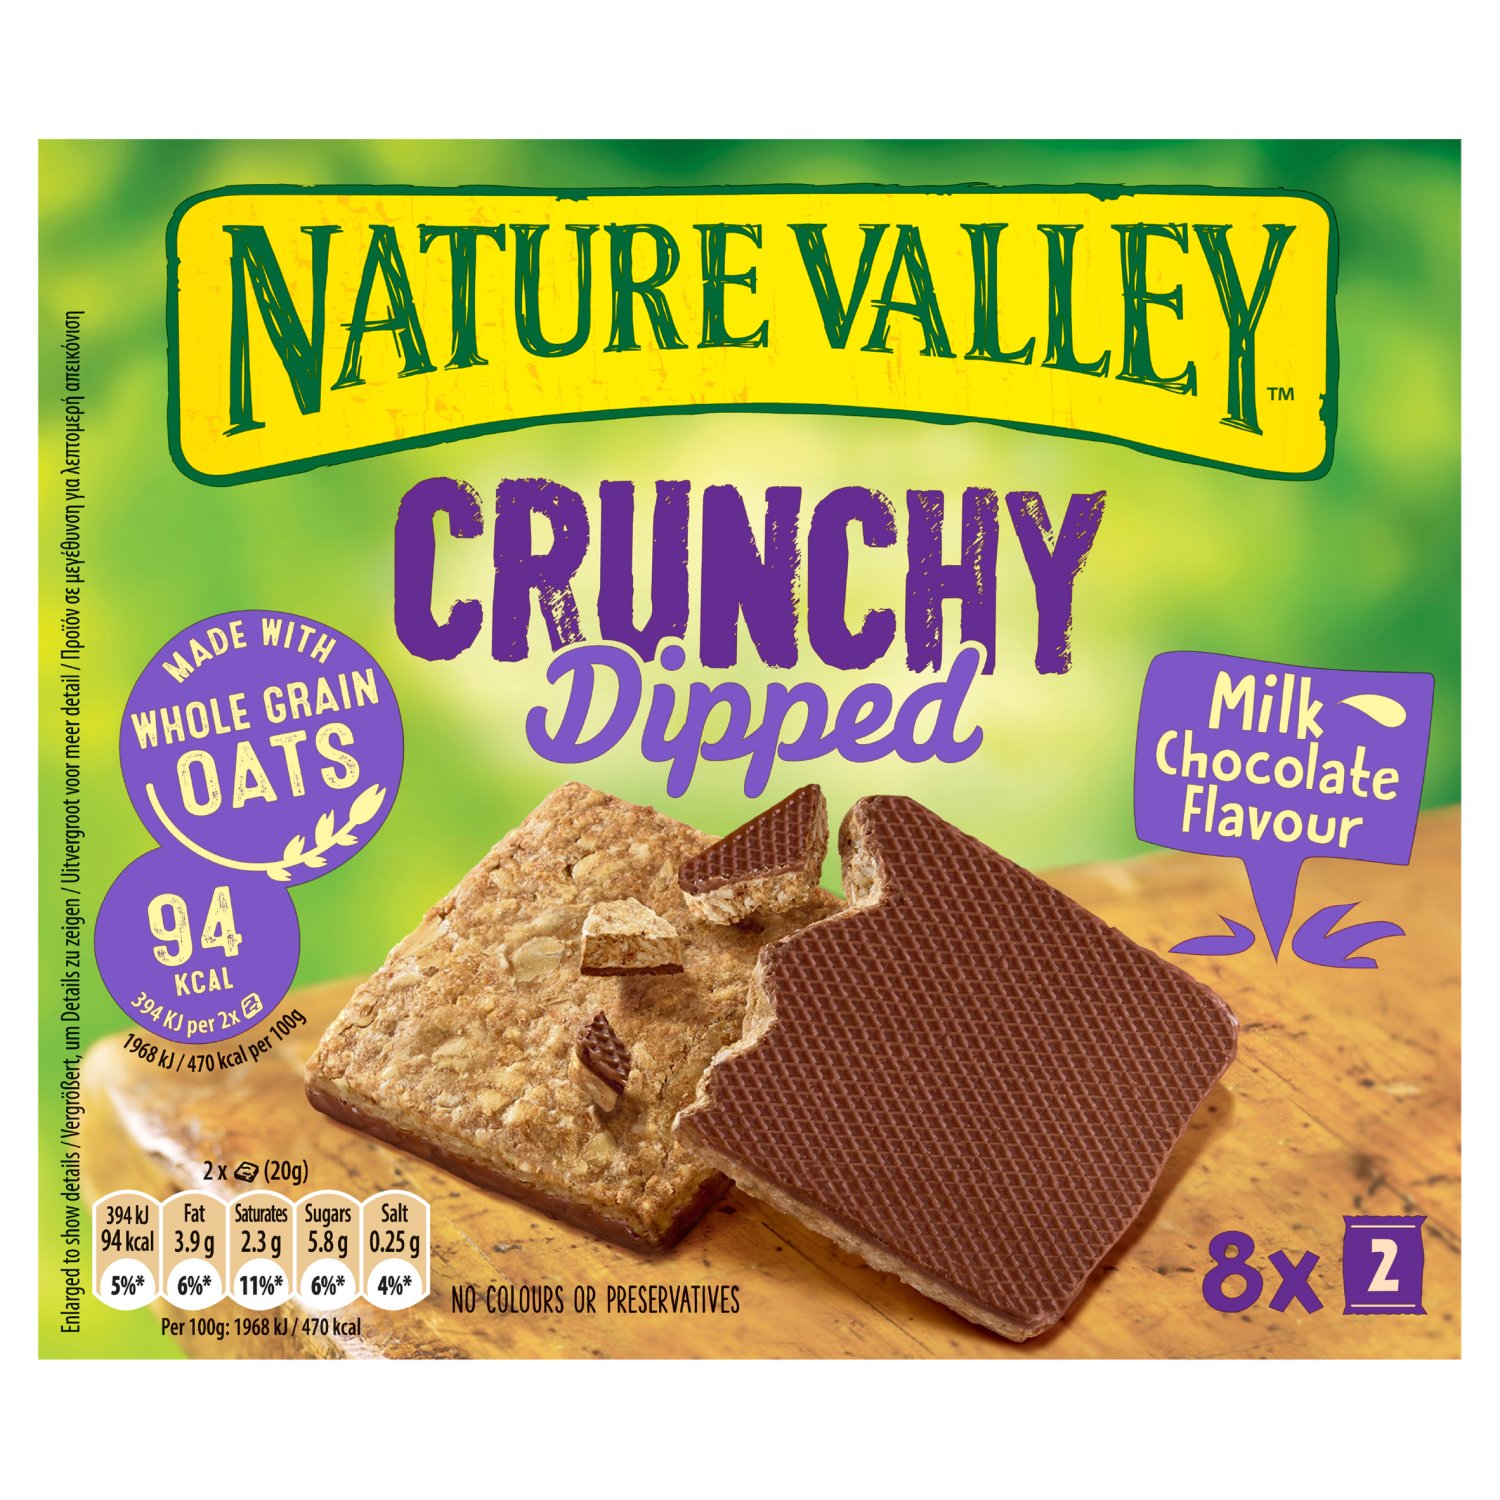 Nature Valley Crunchy Dipped Milk Chocolate 8 Pack (20 g)